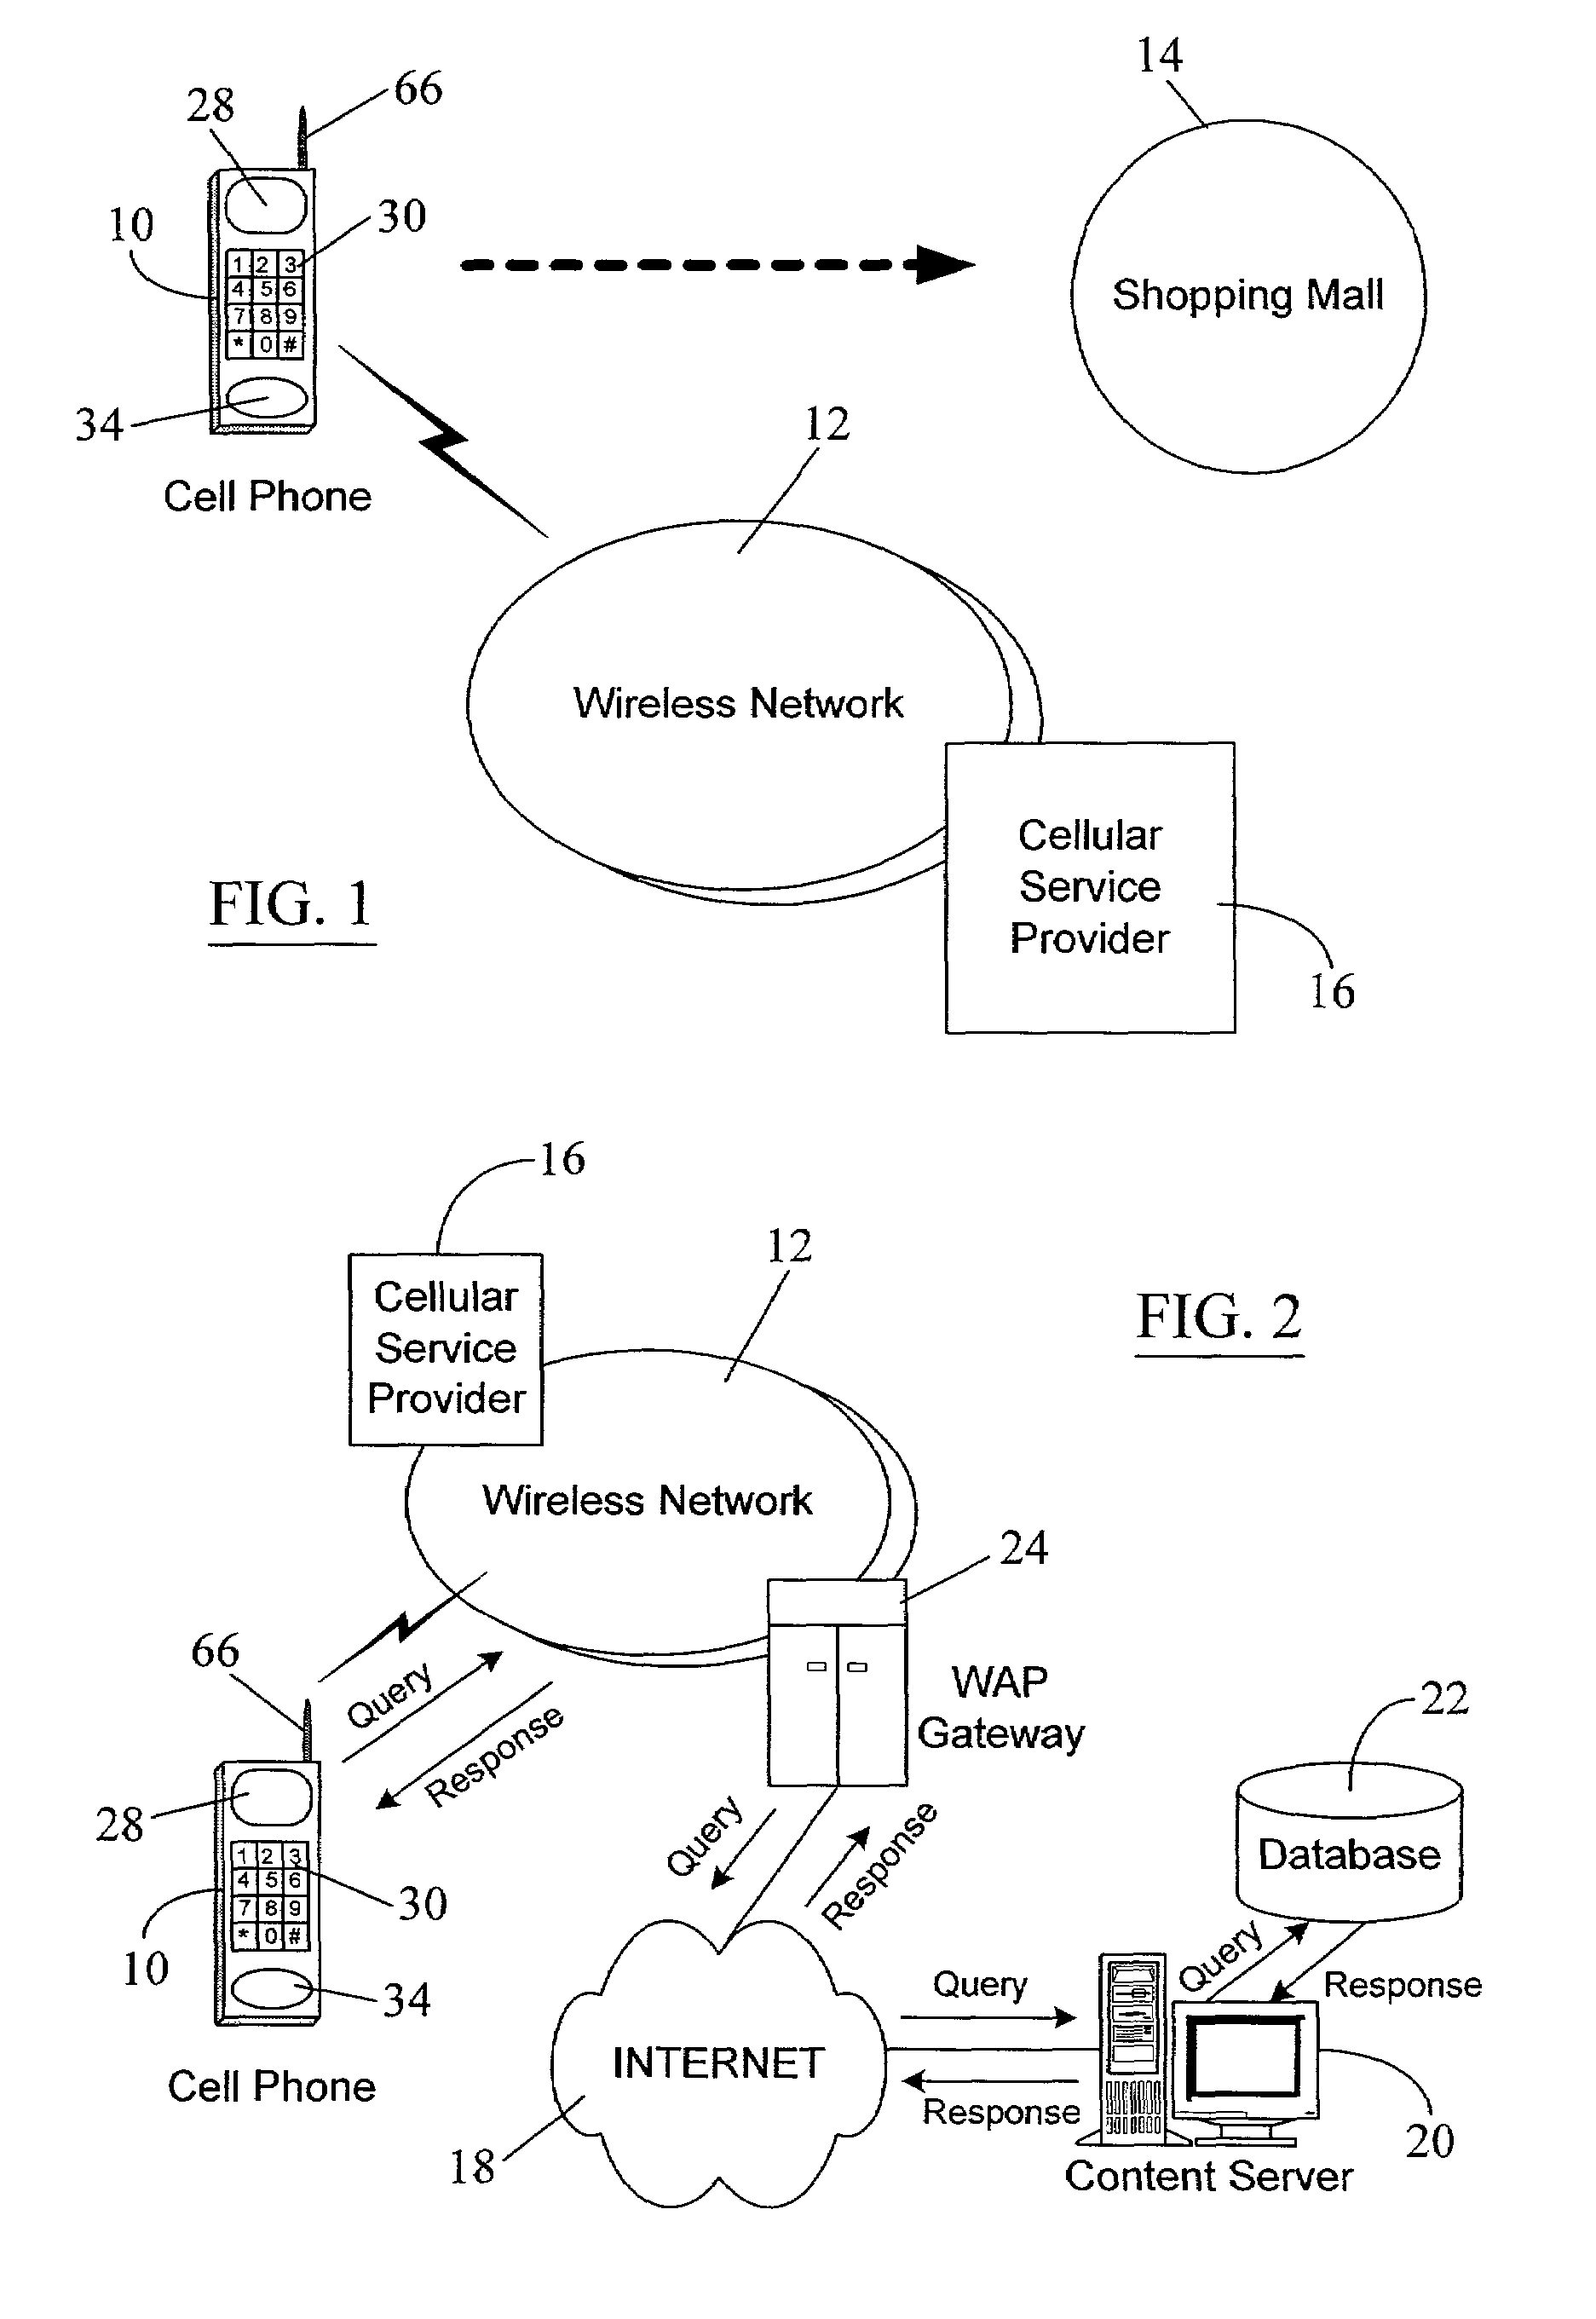 Location blocking service from a wireless service provider